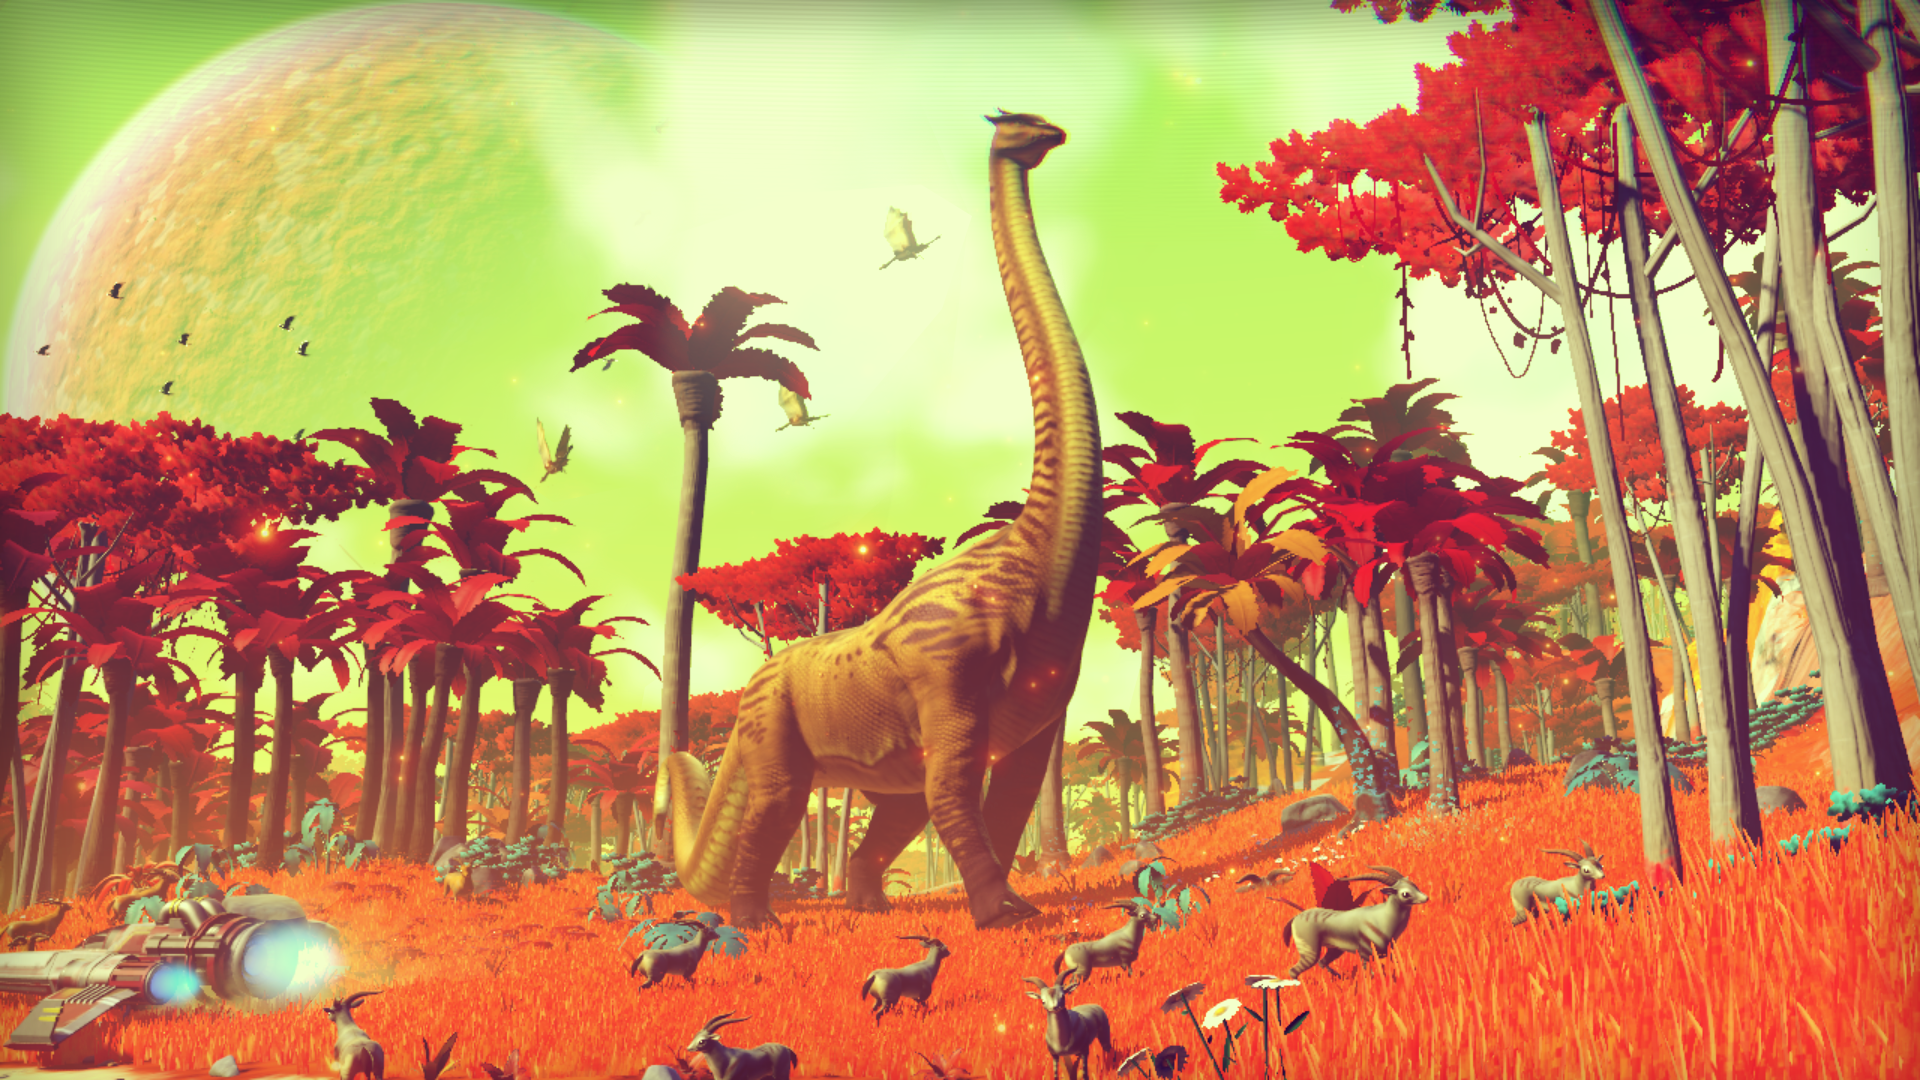 “No Man’s Sky” Release Date Revealed - Appears to Be Set for June Release